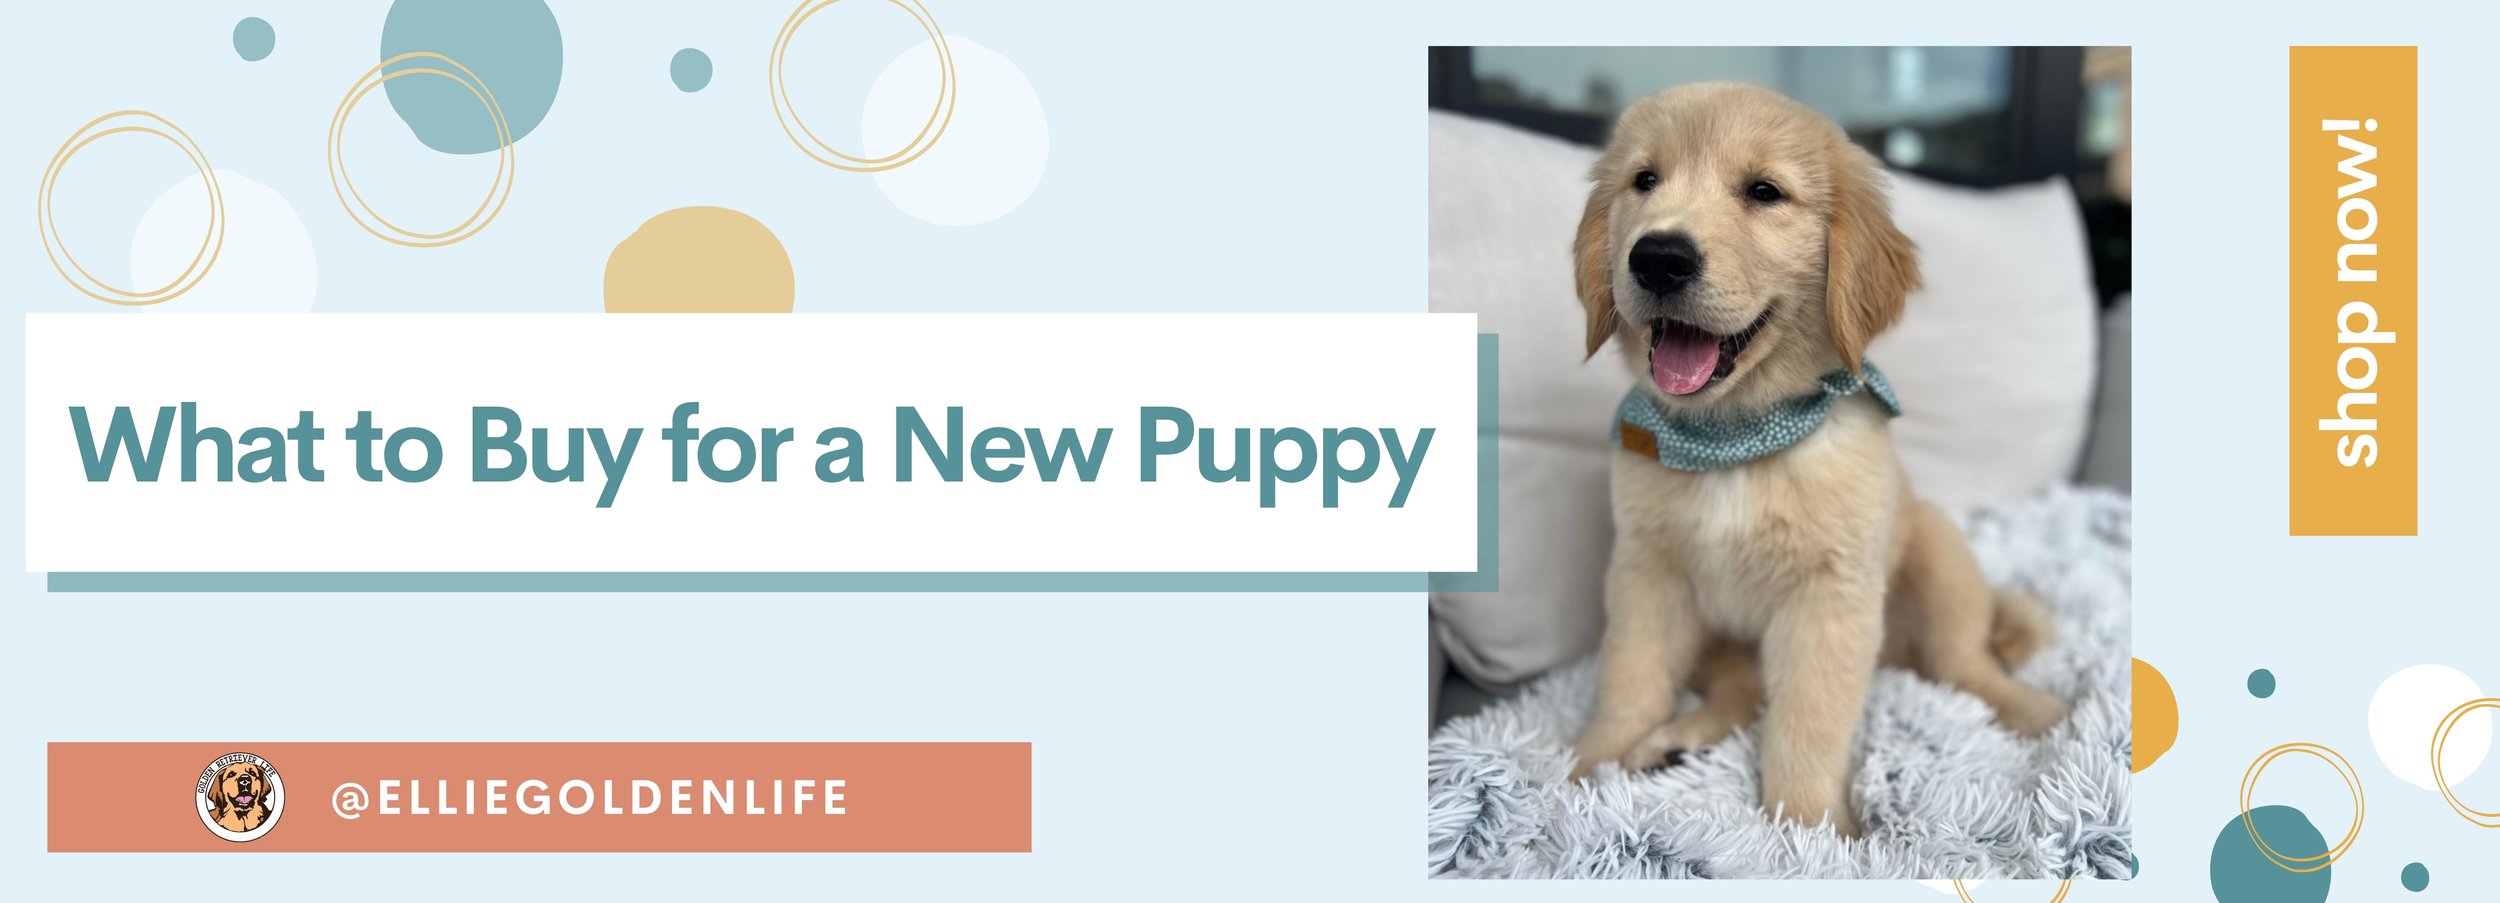 what should i buy for a puppy